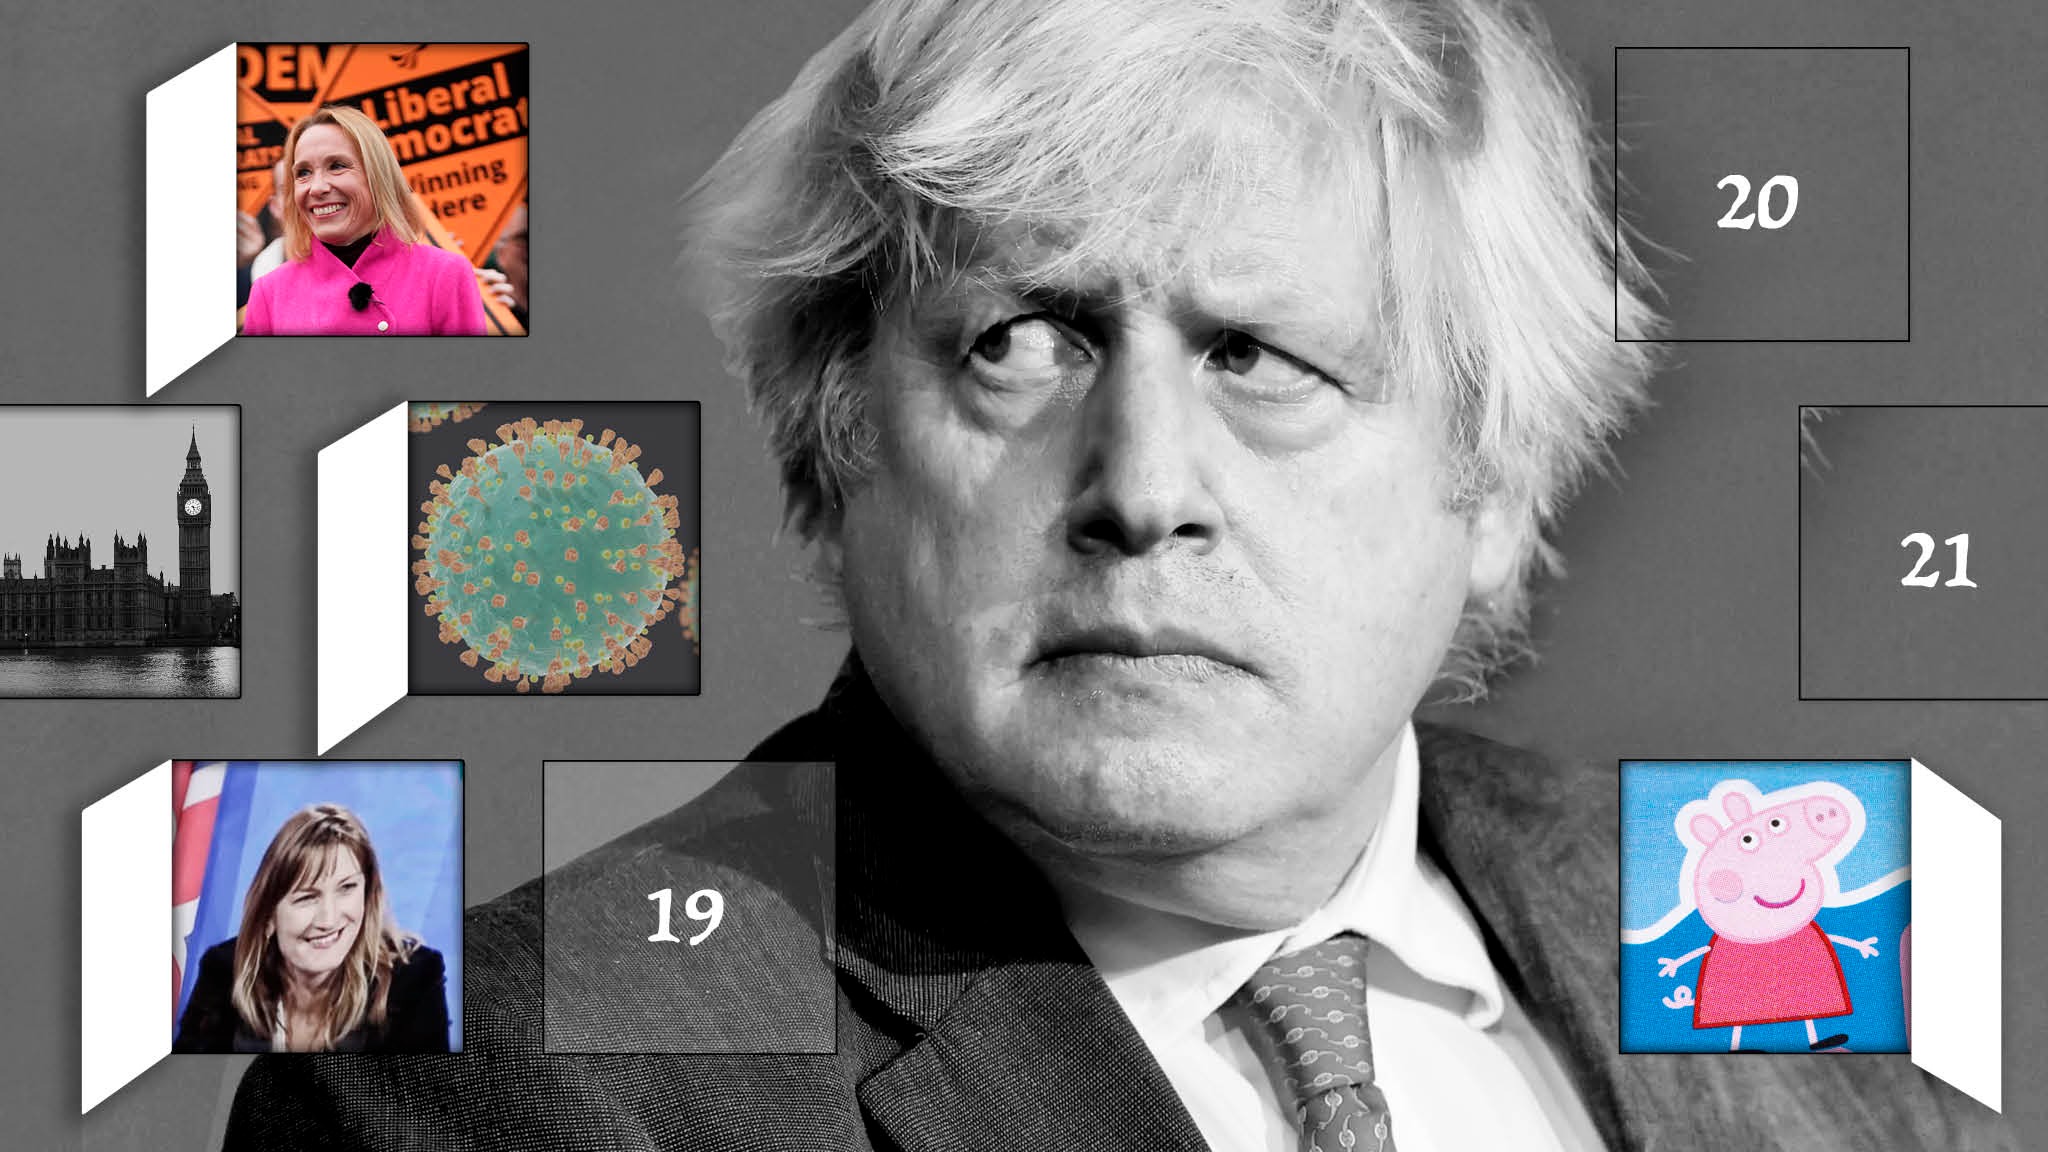 Running out of lives': How vulnerable is Boris Johnson? | Financial Times